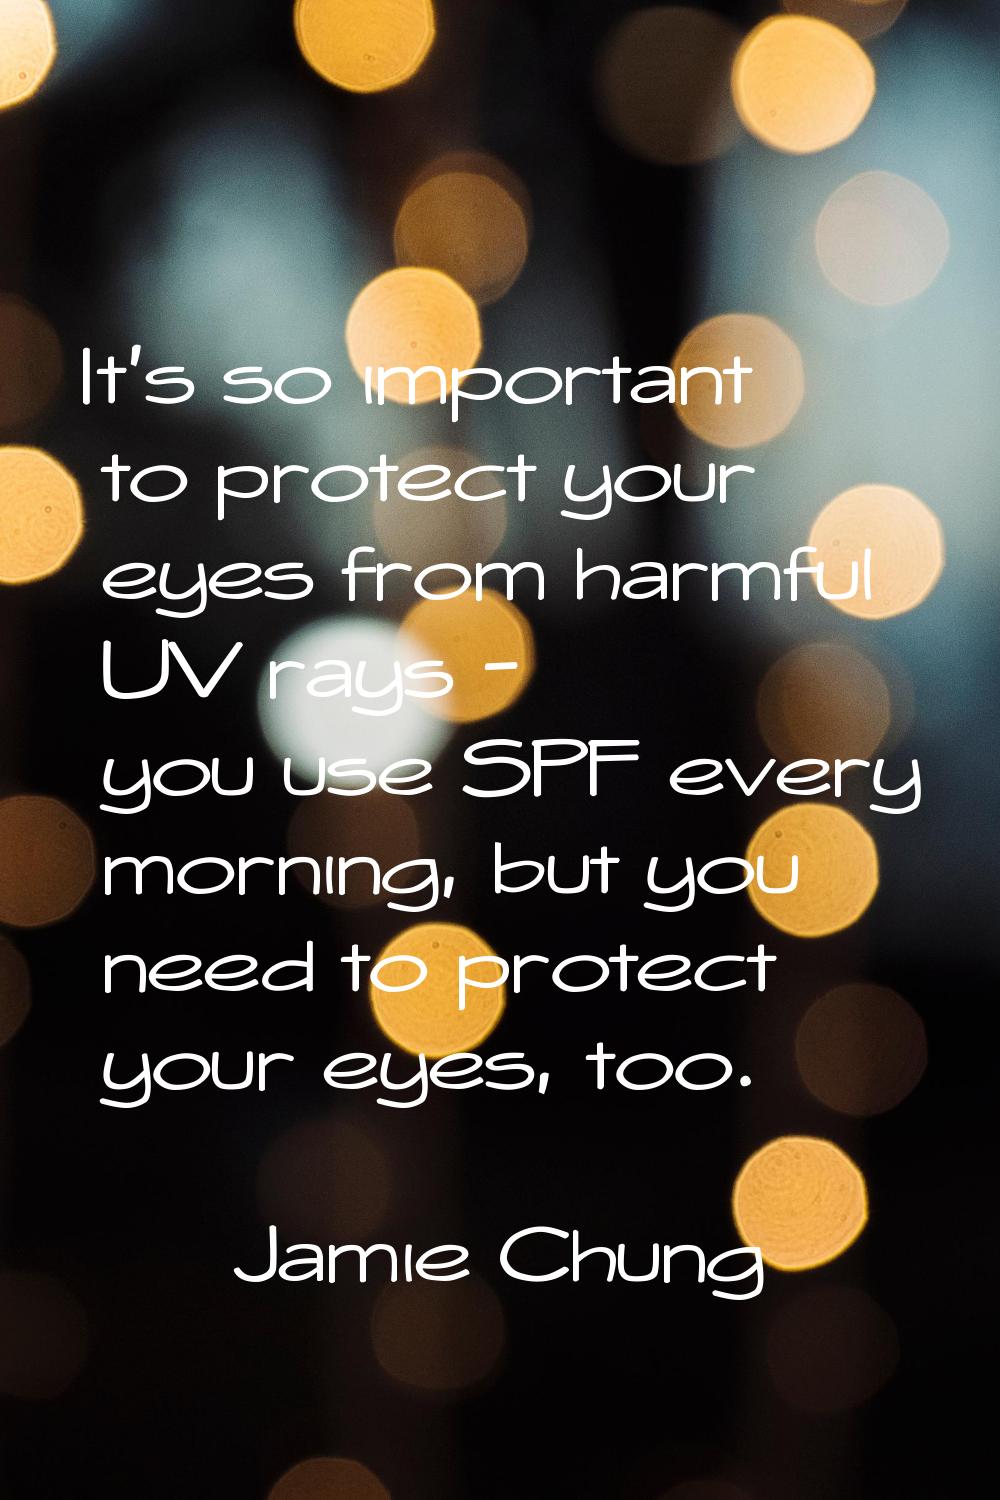 It's so important to protect your eyes from harmful UV rays - you use SPF every morning, but you ne